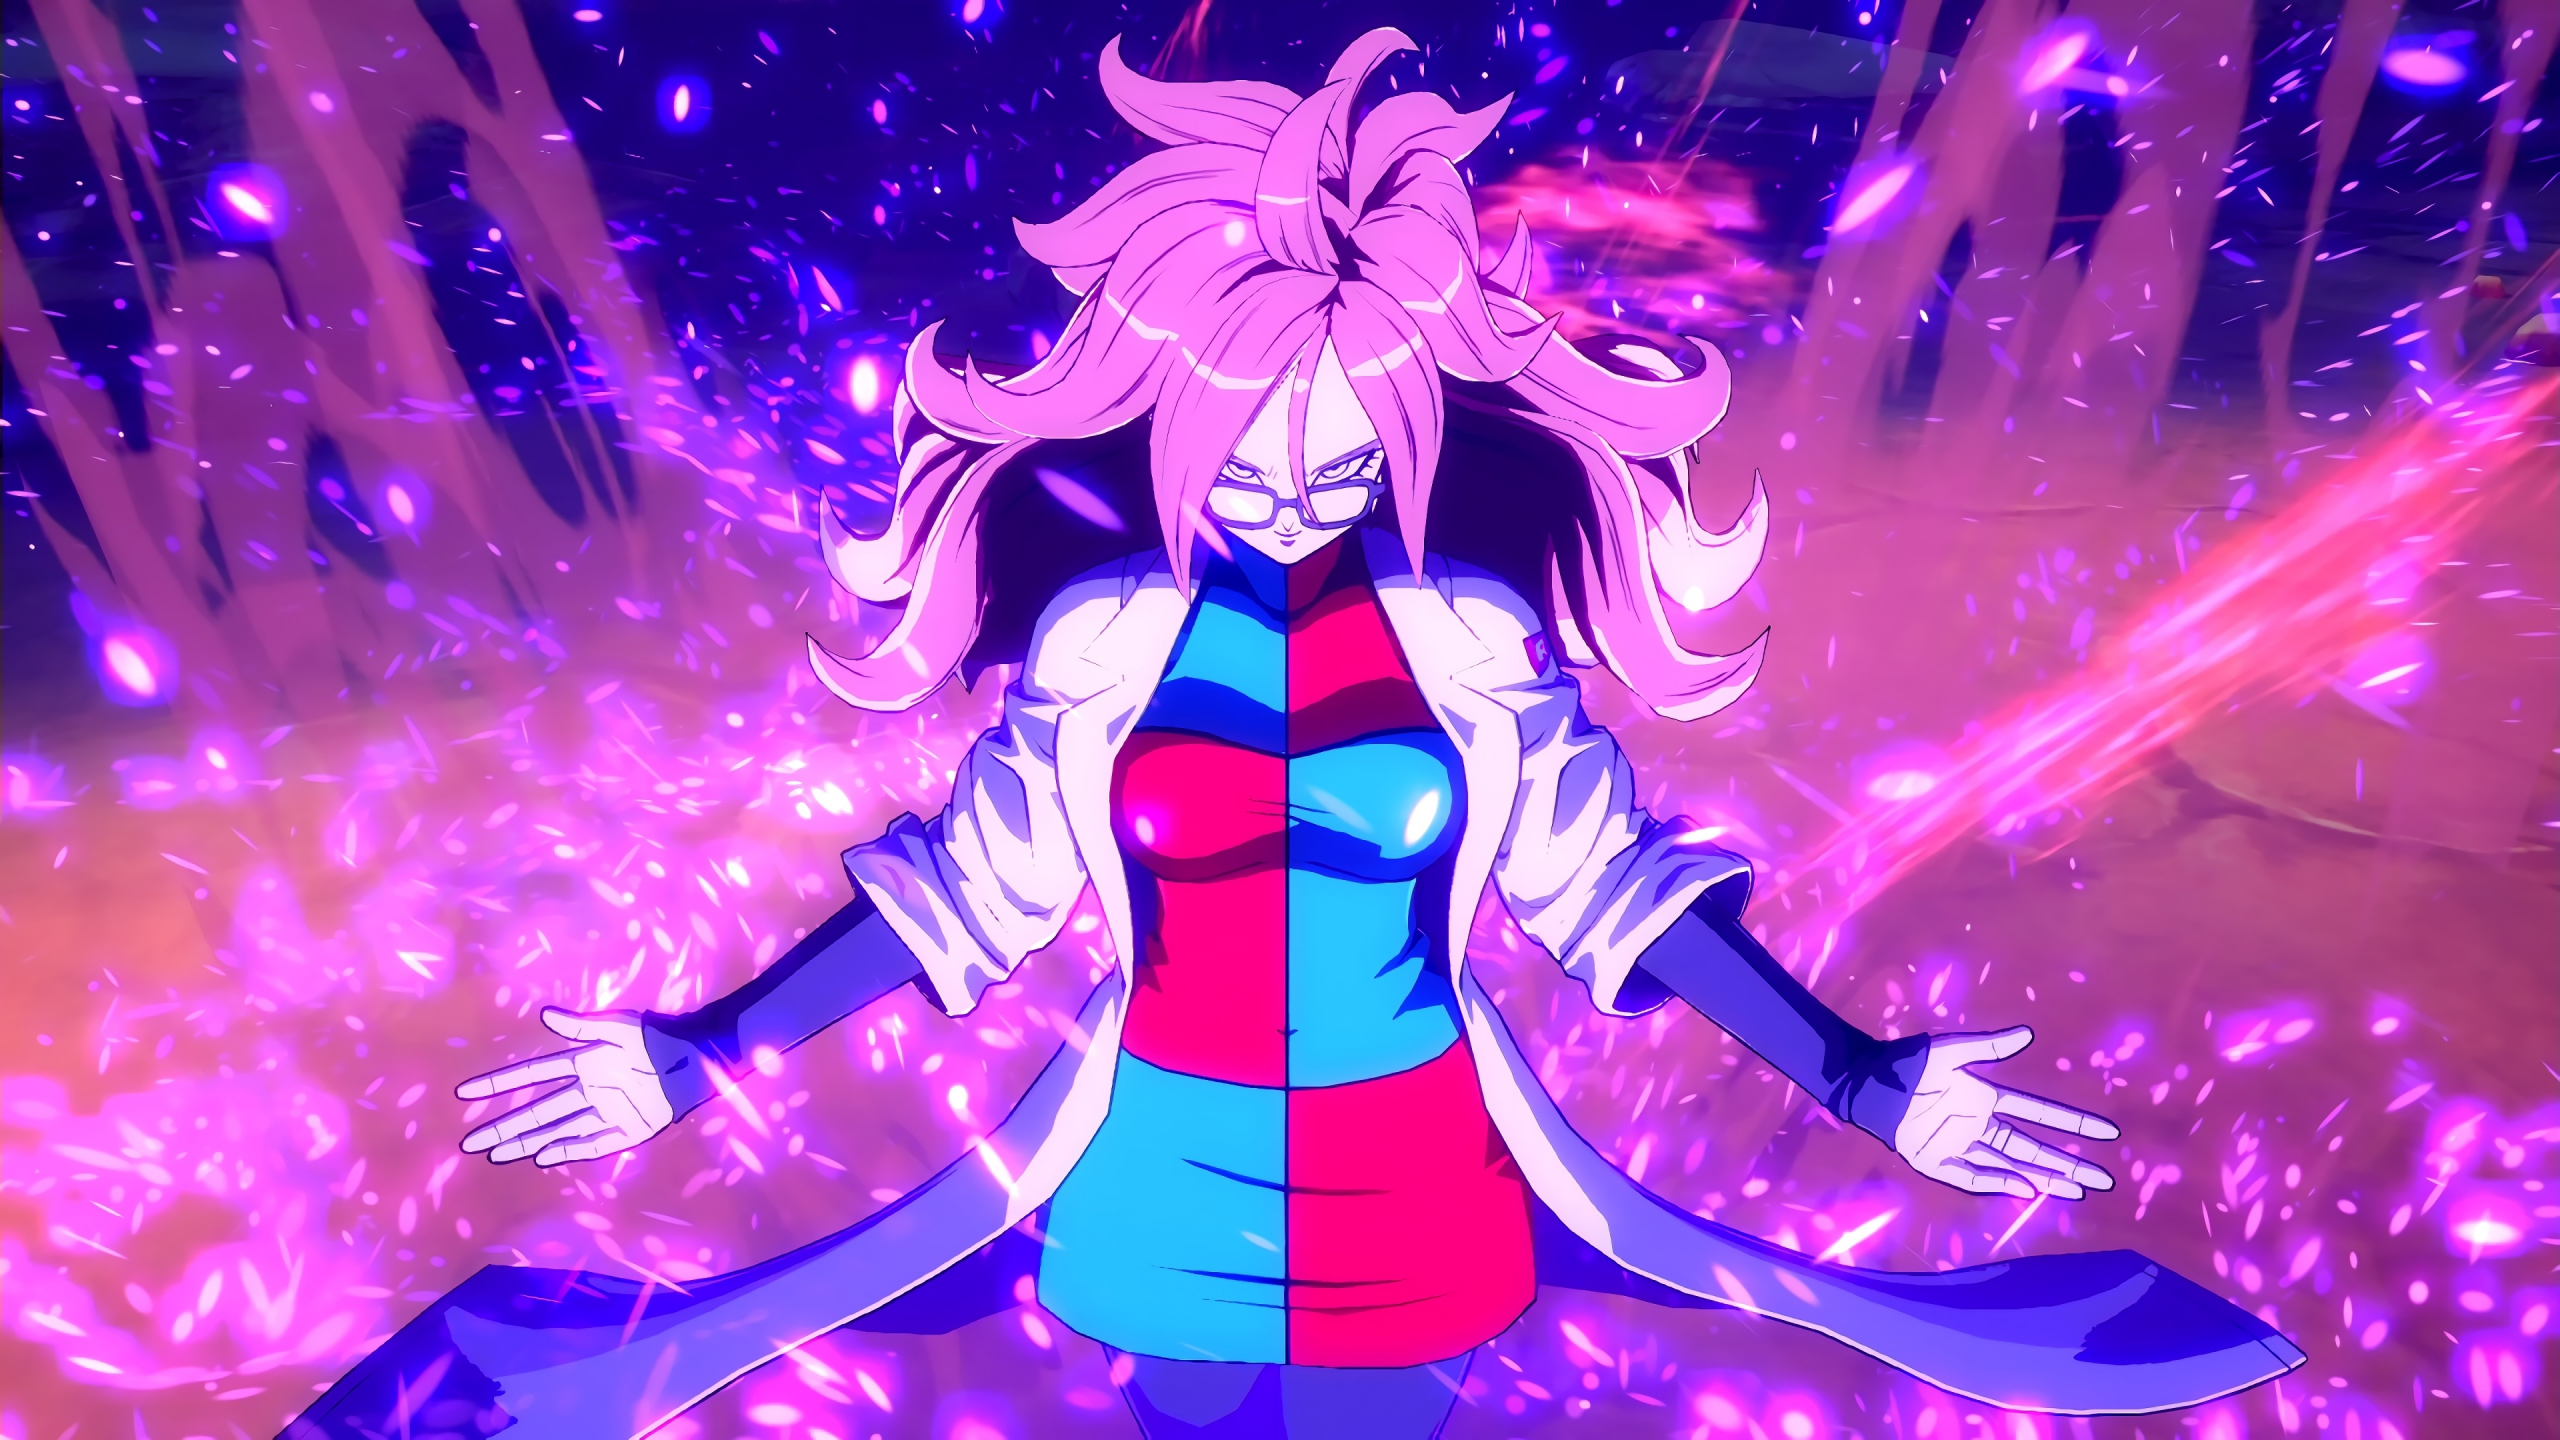 Download 2560x1440 Wallpaper Android 21 Full Power Anime Girl Dragon Ball Fighterz Dual Wide Widescreen 16 9 Widescreen 2560x1440 Hd Image Background 4693